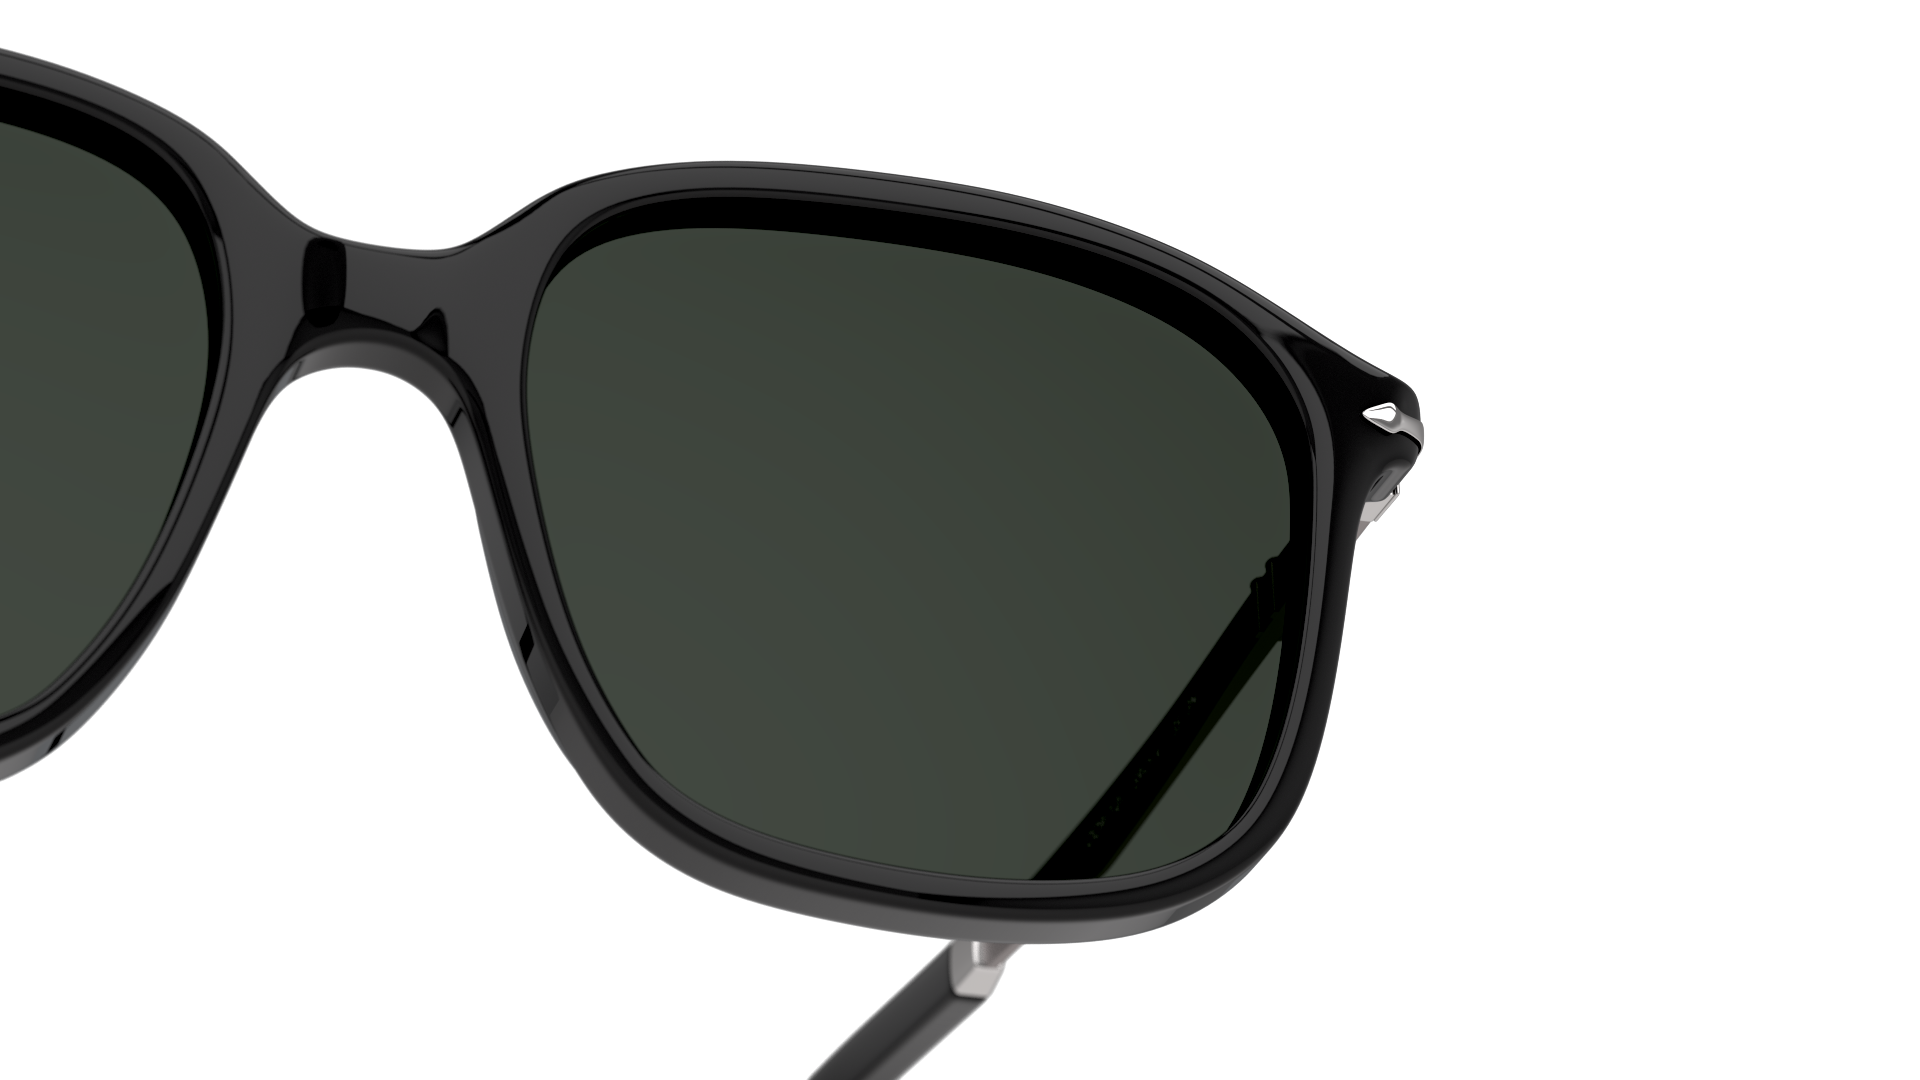 [products.image.detail01] Persol 0PO3246S 95/31